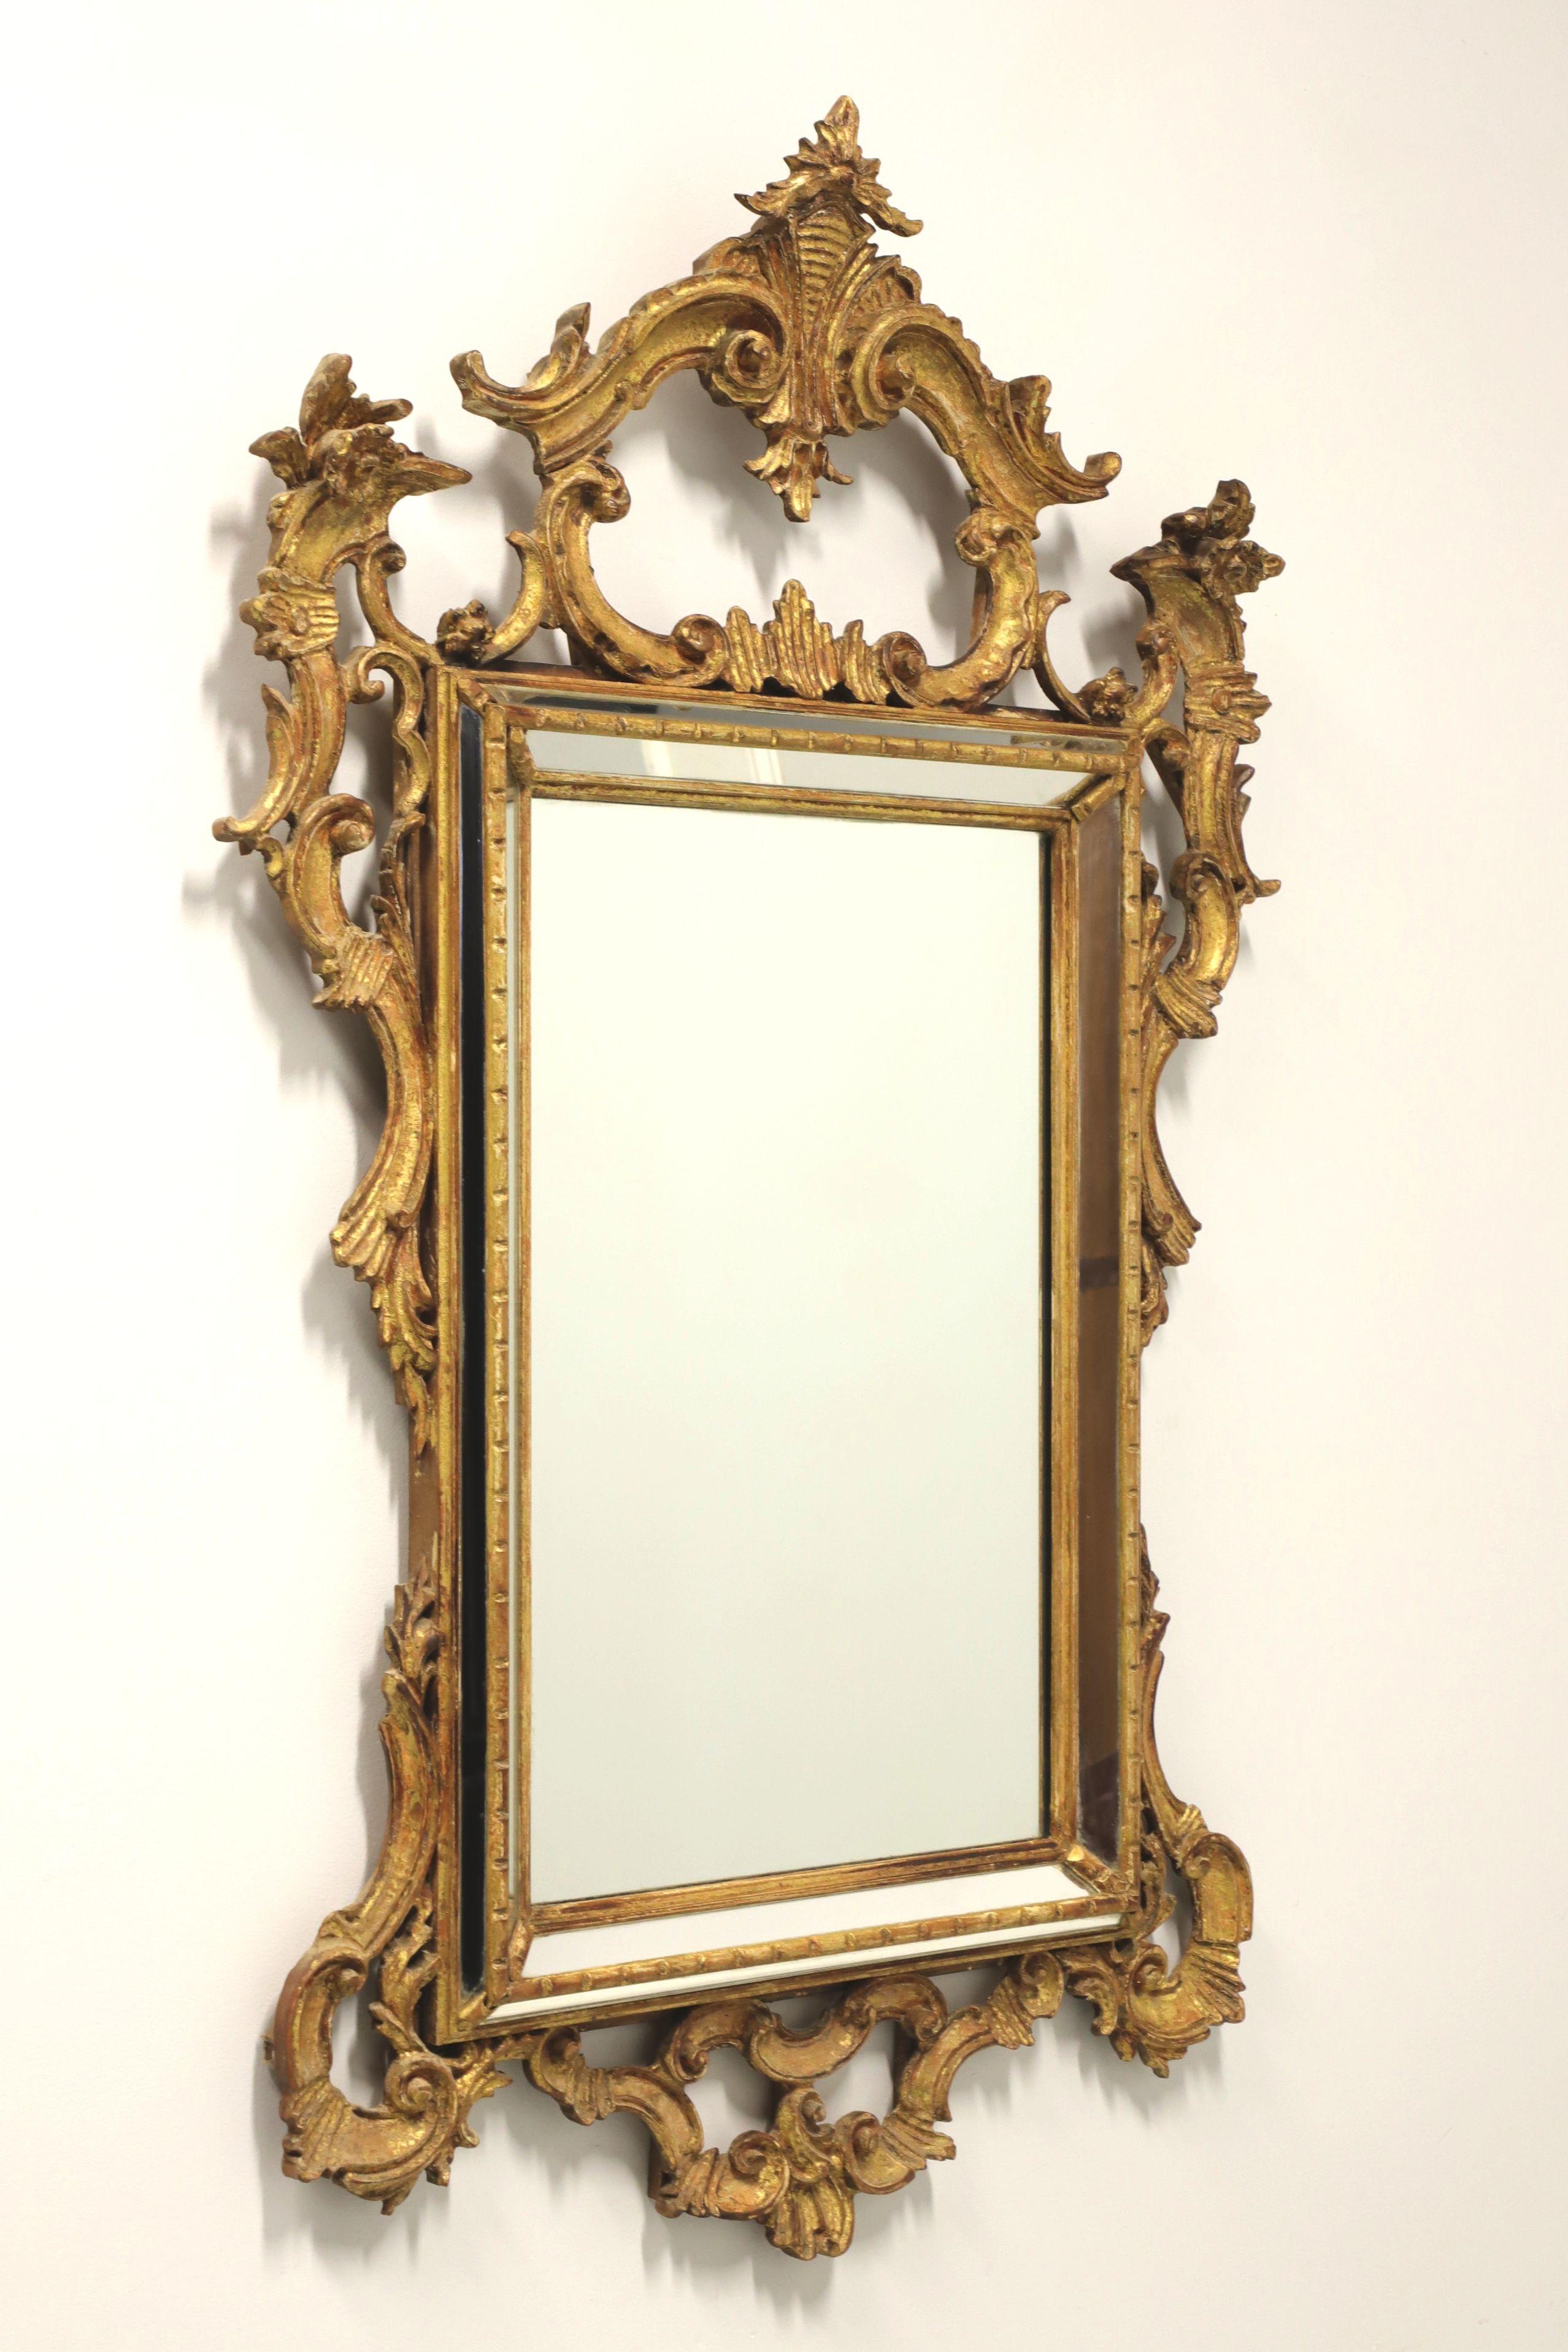 LABARGE 1960's Gold Carved French Louis XV Rococo Parclose Wall Mirror - B 3